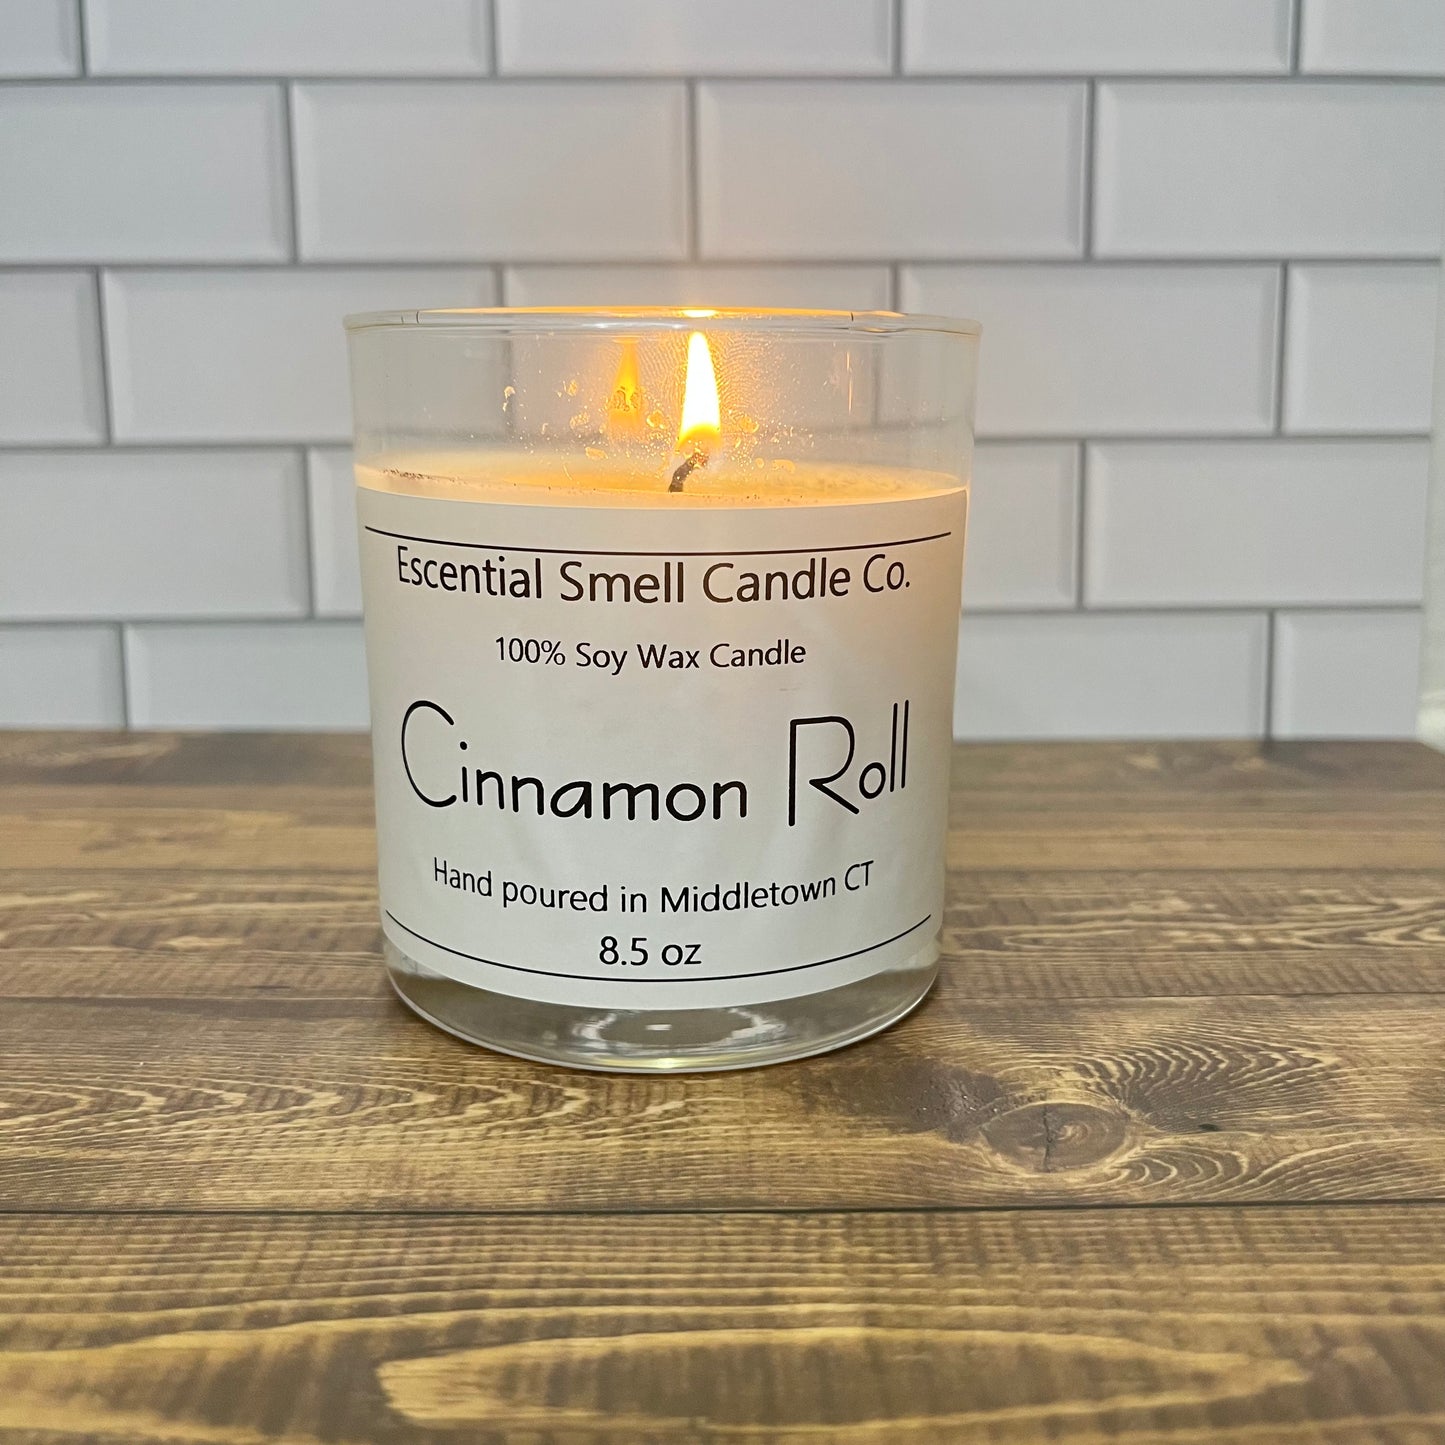 Close your eyes and imagine the aroma of freshly baked cinnamon rolls coming out of the oven. This scent has the perfect blend of spicy cinnamon, sweet vanilla and hints of cream! Our Cinnamon Roll Scented candle has sprinkles of biodegradable brown glitter on top to add the finishing touches to the Cinnamon Roll look.